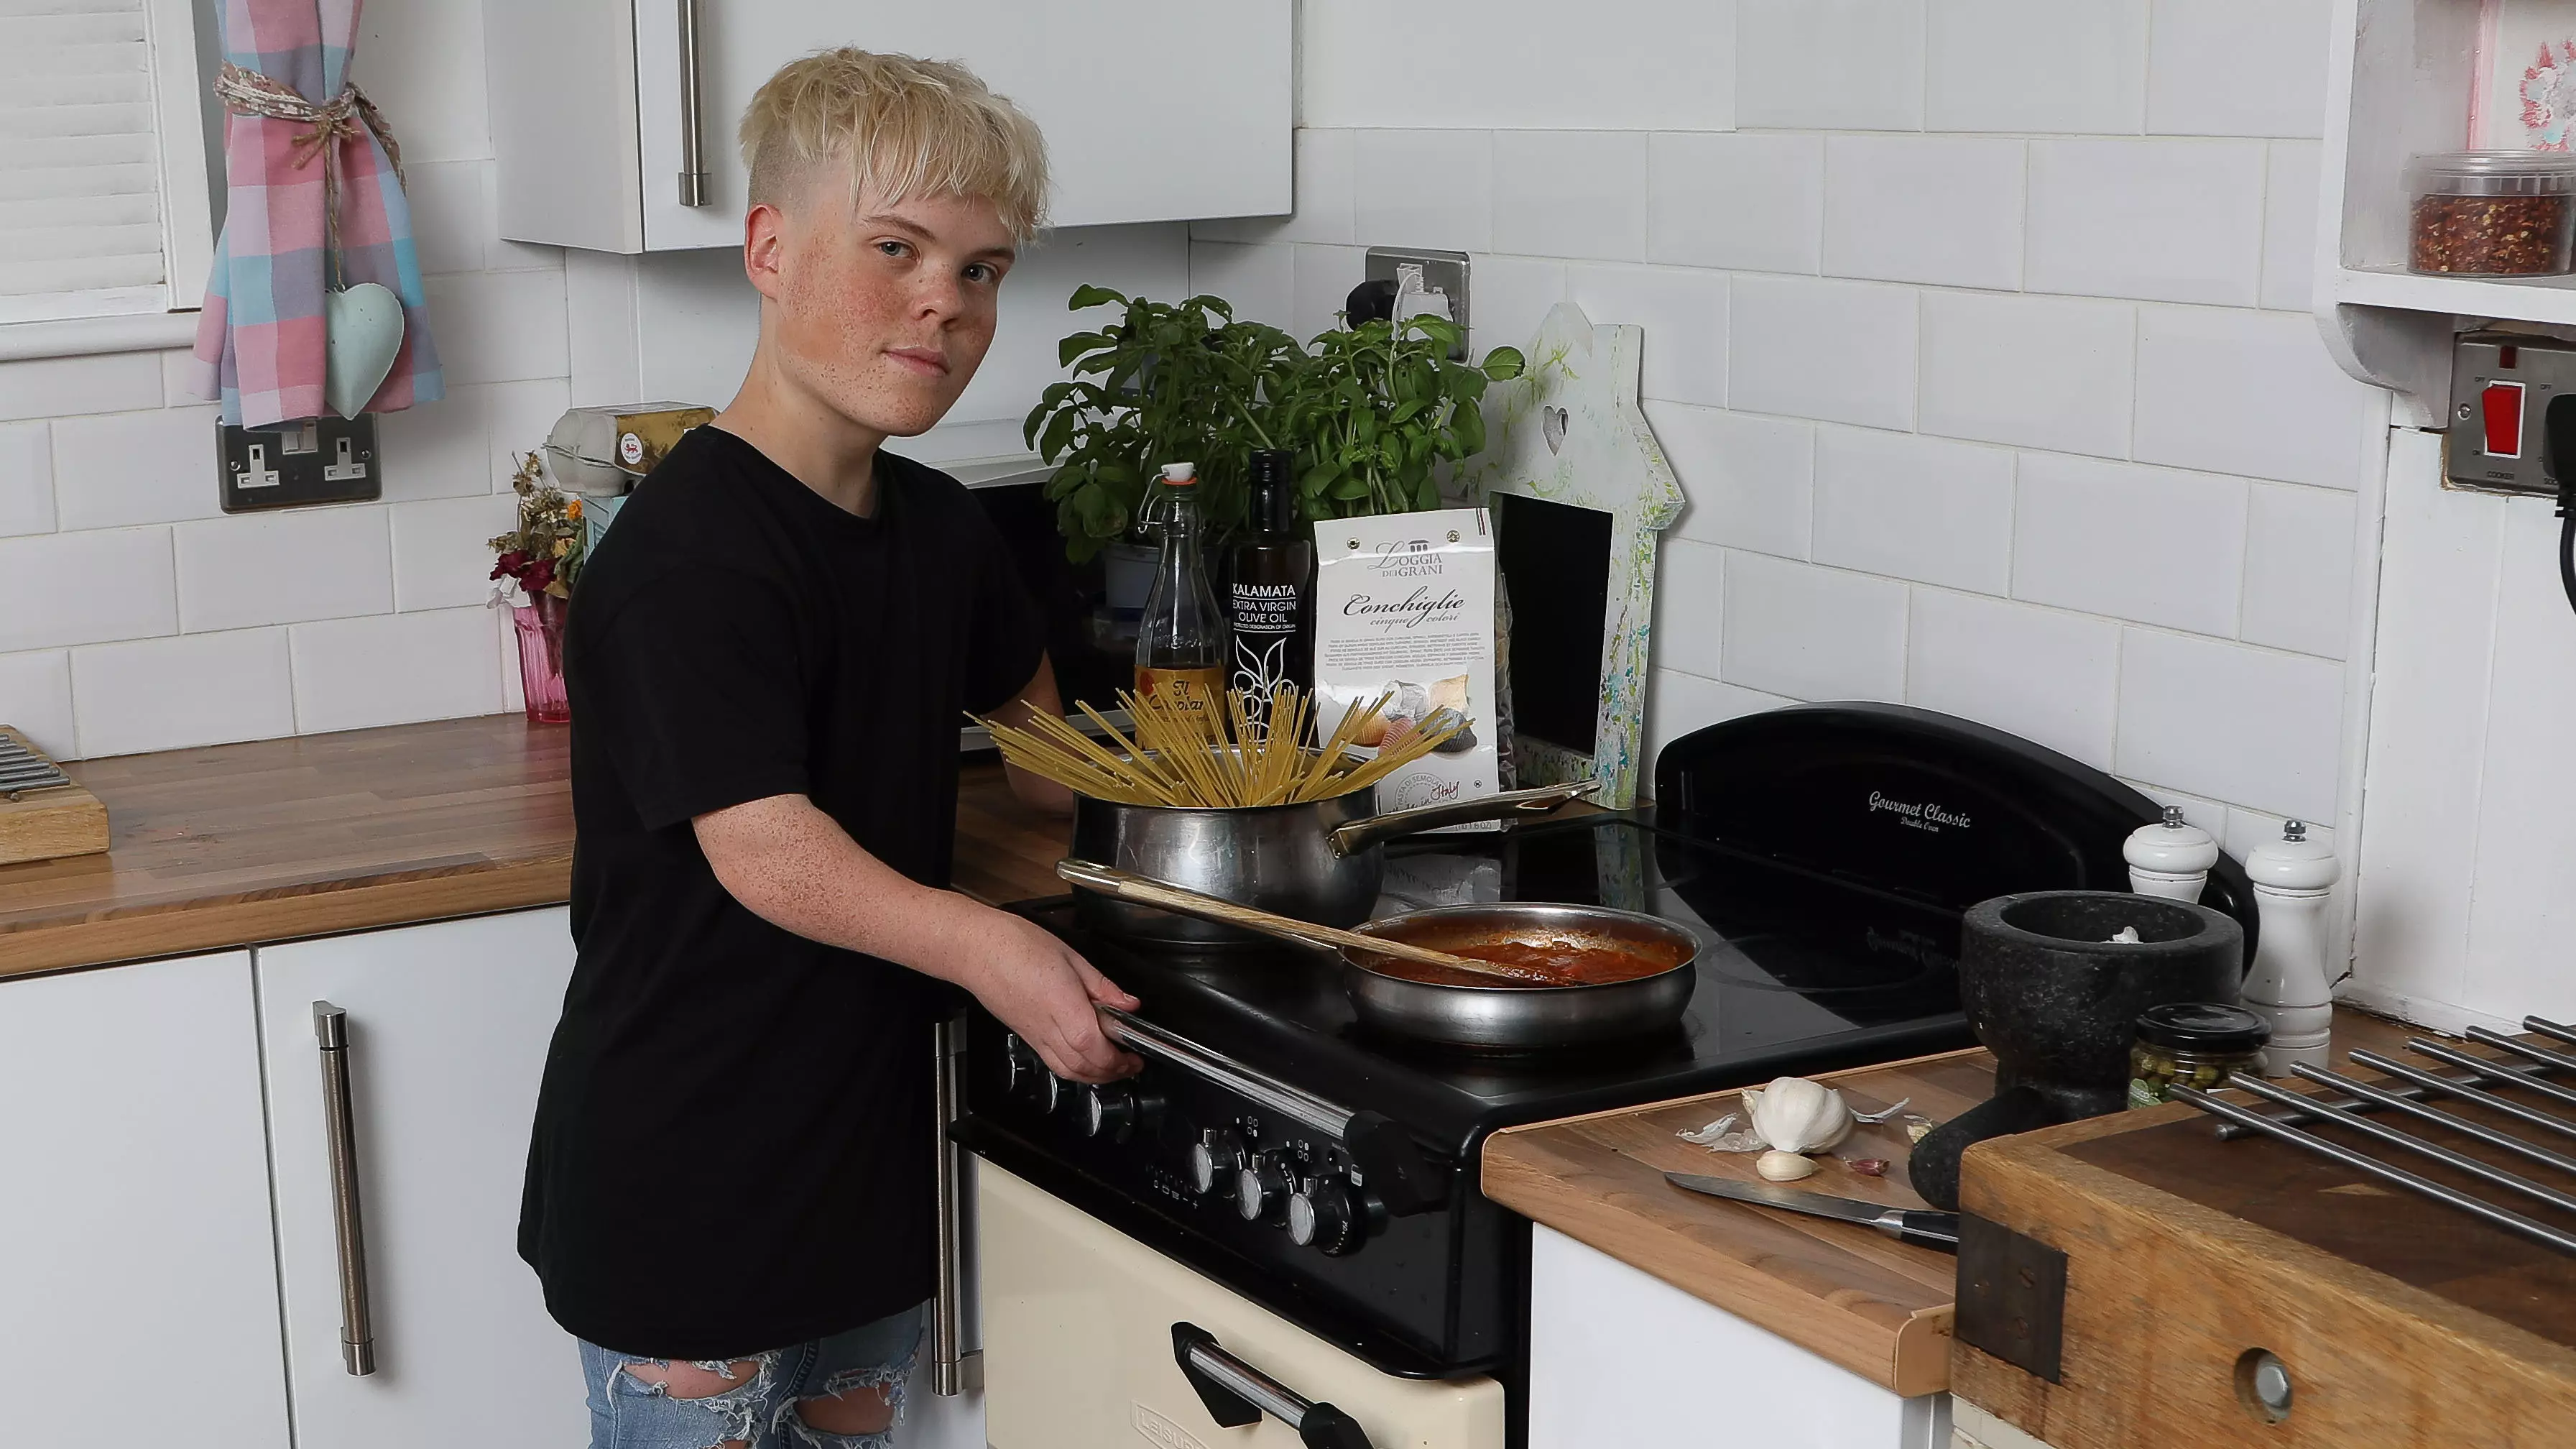 ​Teenager With Dwarfism Banned From College Kitchen As Height Poses ‘Safety Risk’